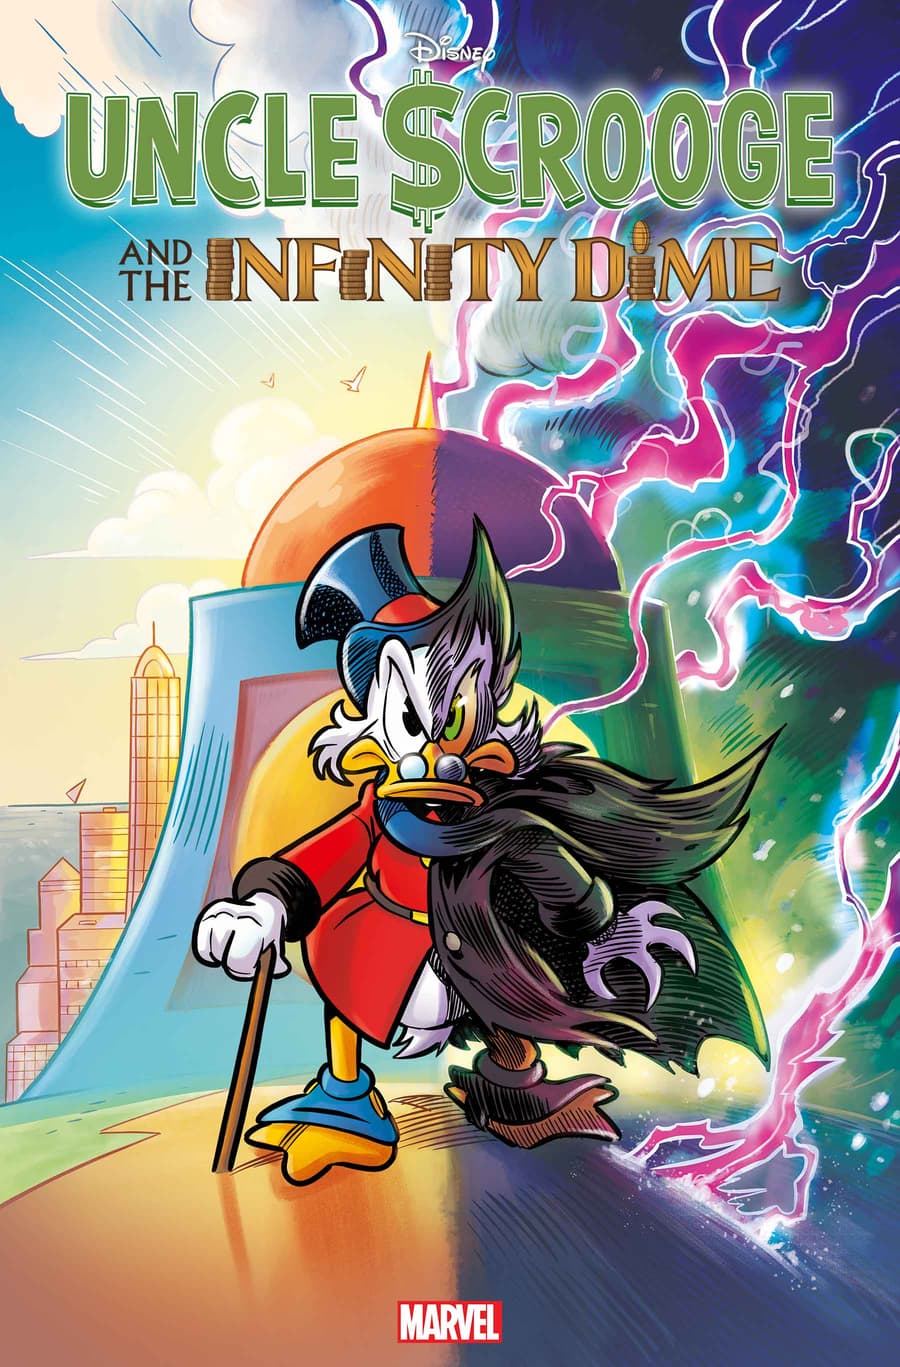 UNCLE $CROOGE AND THE INFINITY DIME #1 Cover A by Lorenzo Pastrovicchio